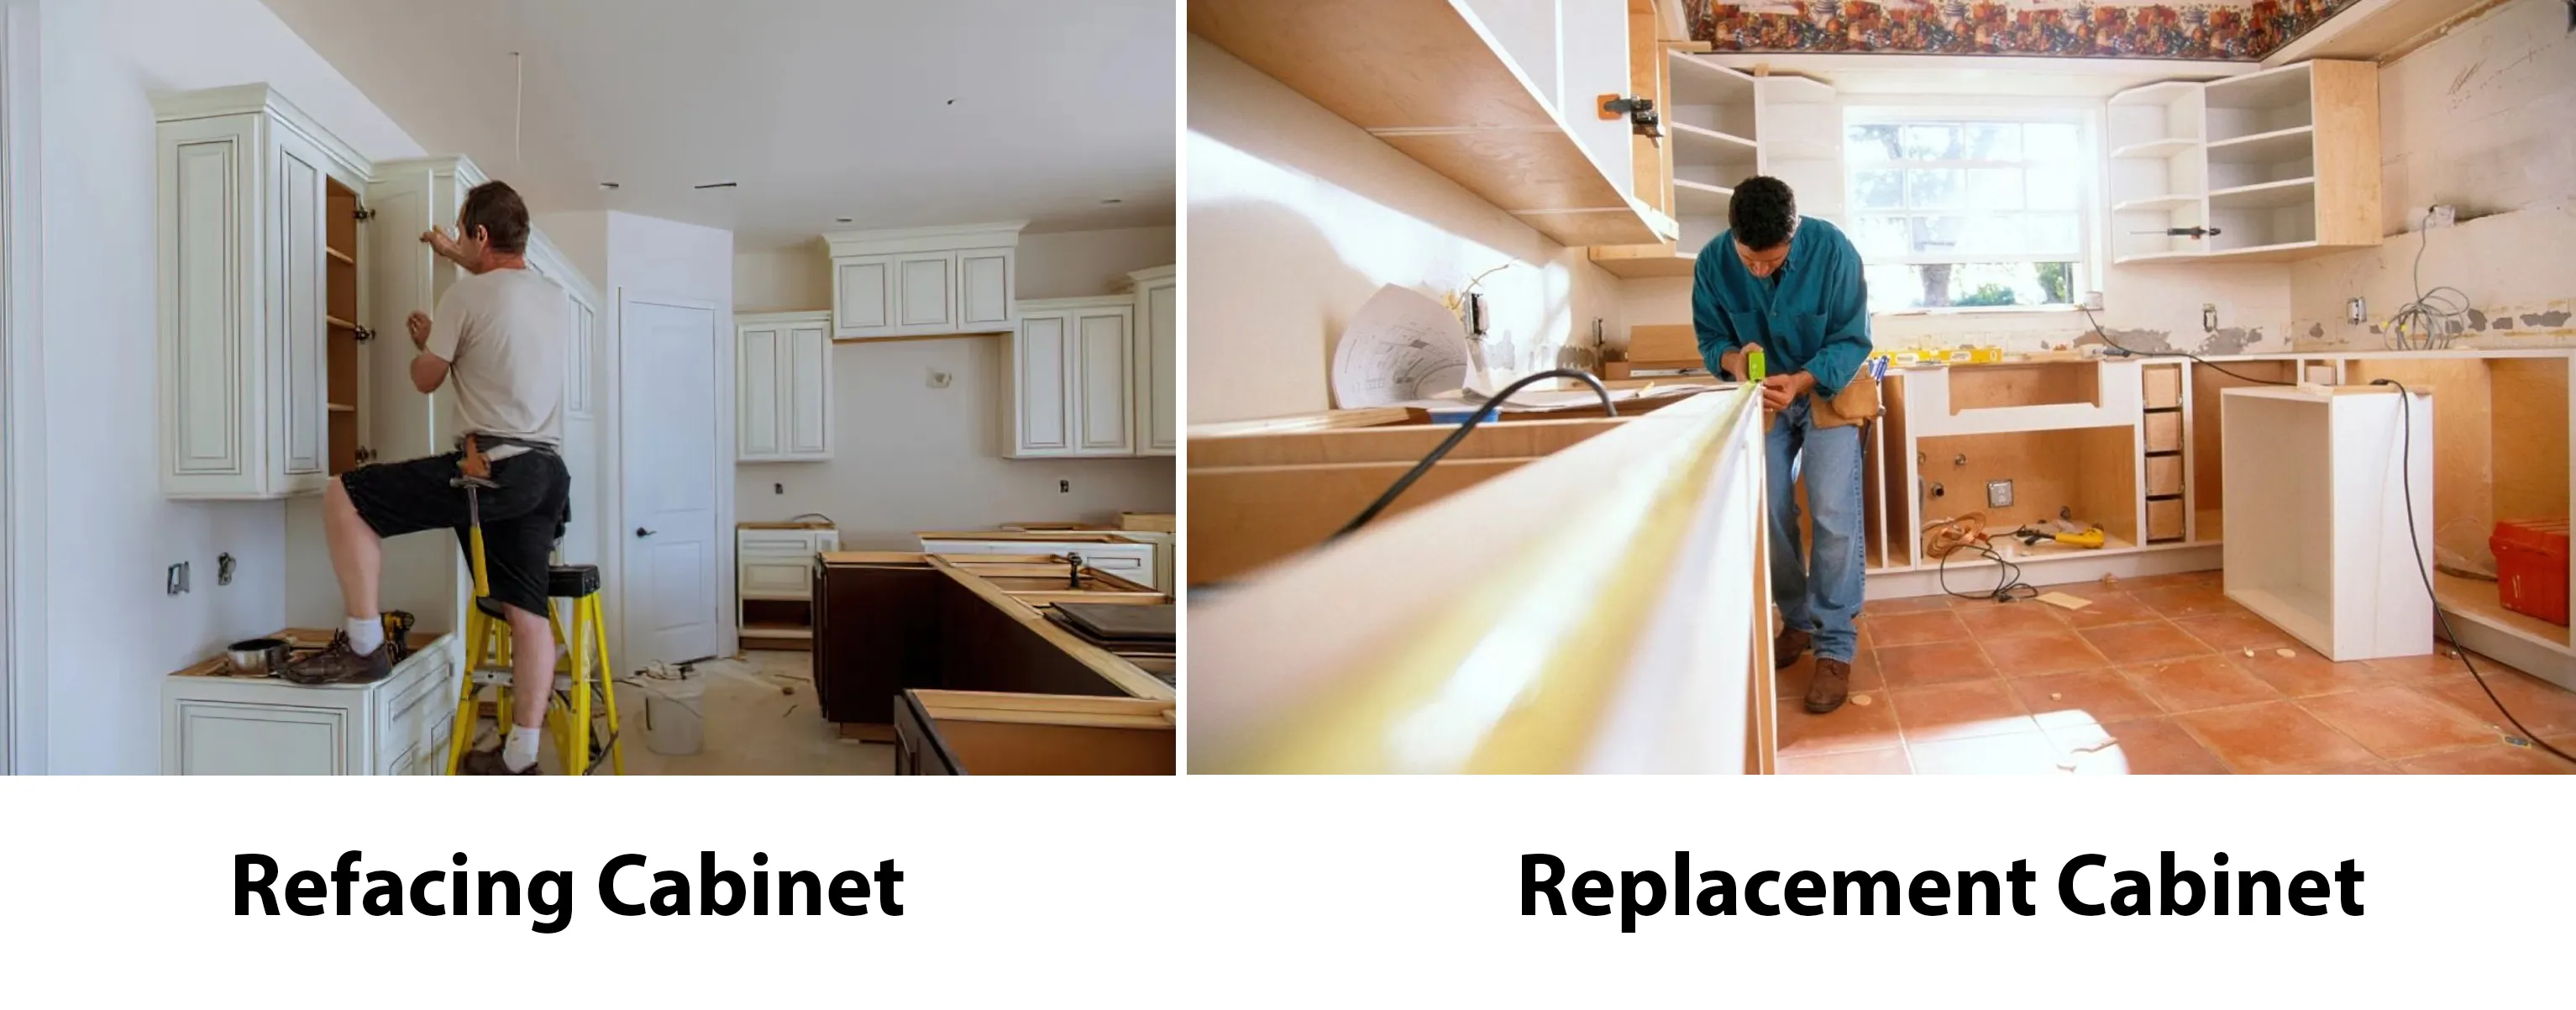 Biggest difference betweenthem: Refacing keeping the existing cabinet boxes, replacement removing the old cabinets and installing entirely new ones